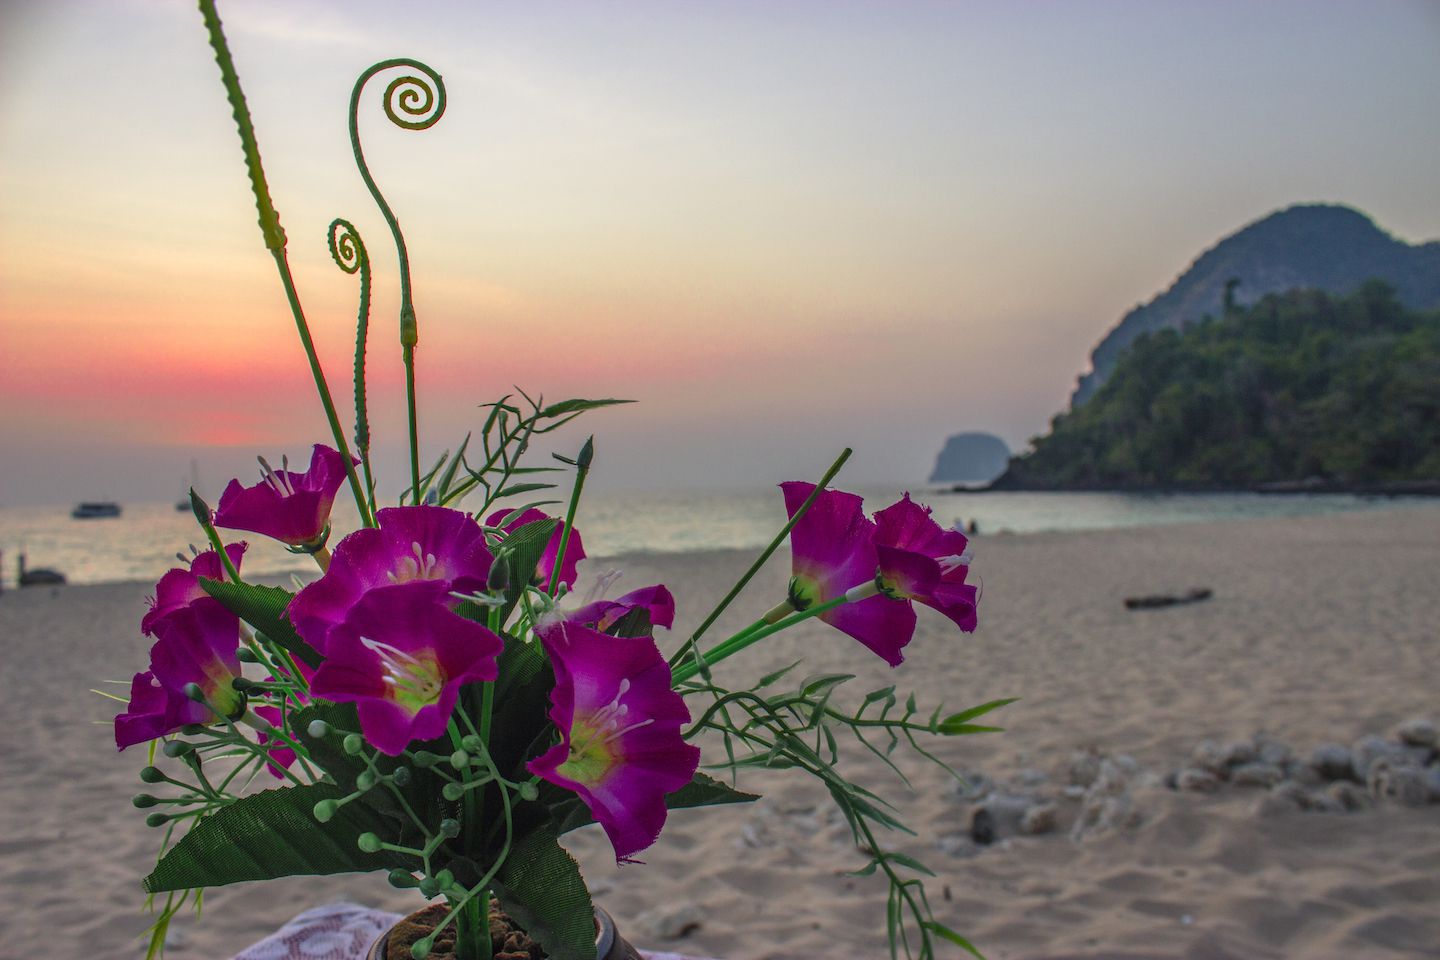 Flowers decorating our table during the Valentine's Day sunset dinner, Koh Muk, Thailand